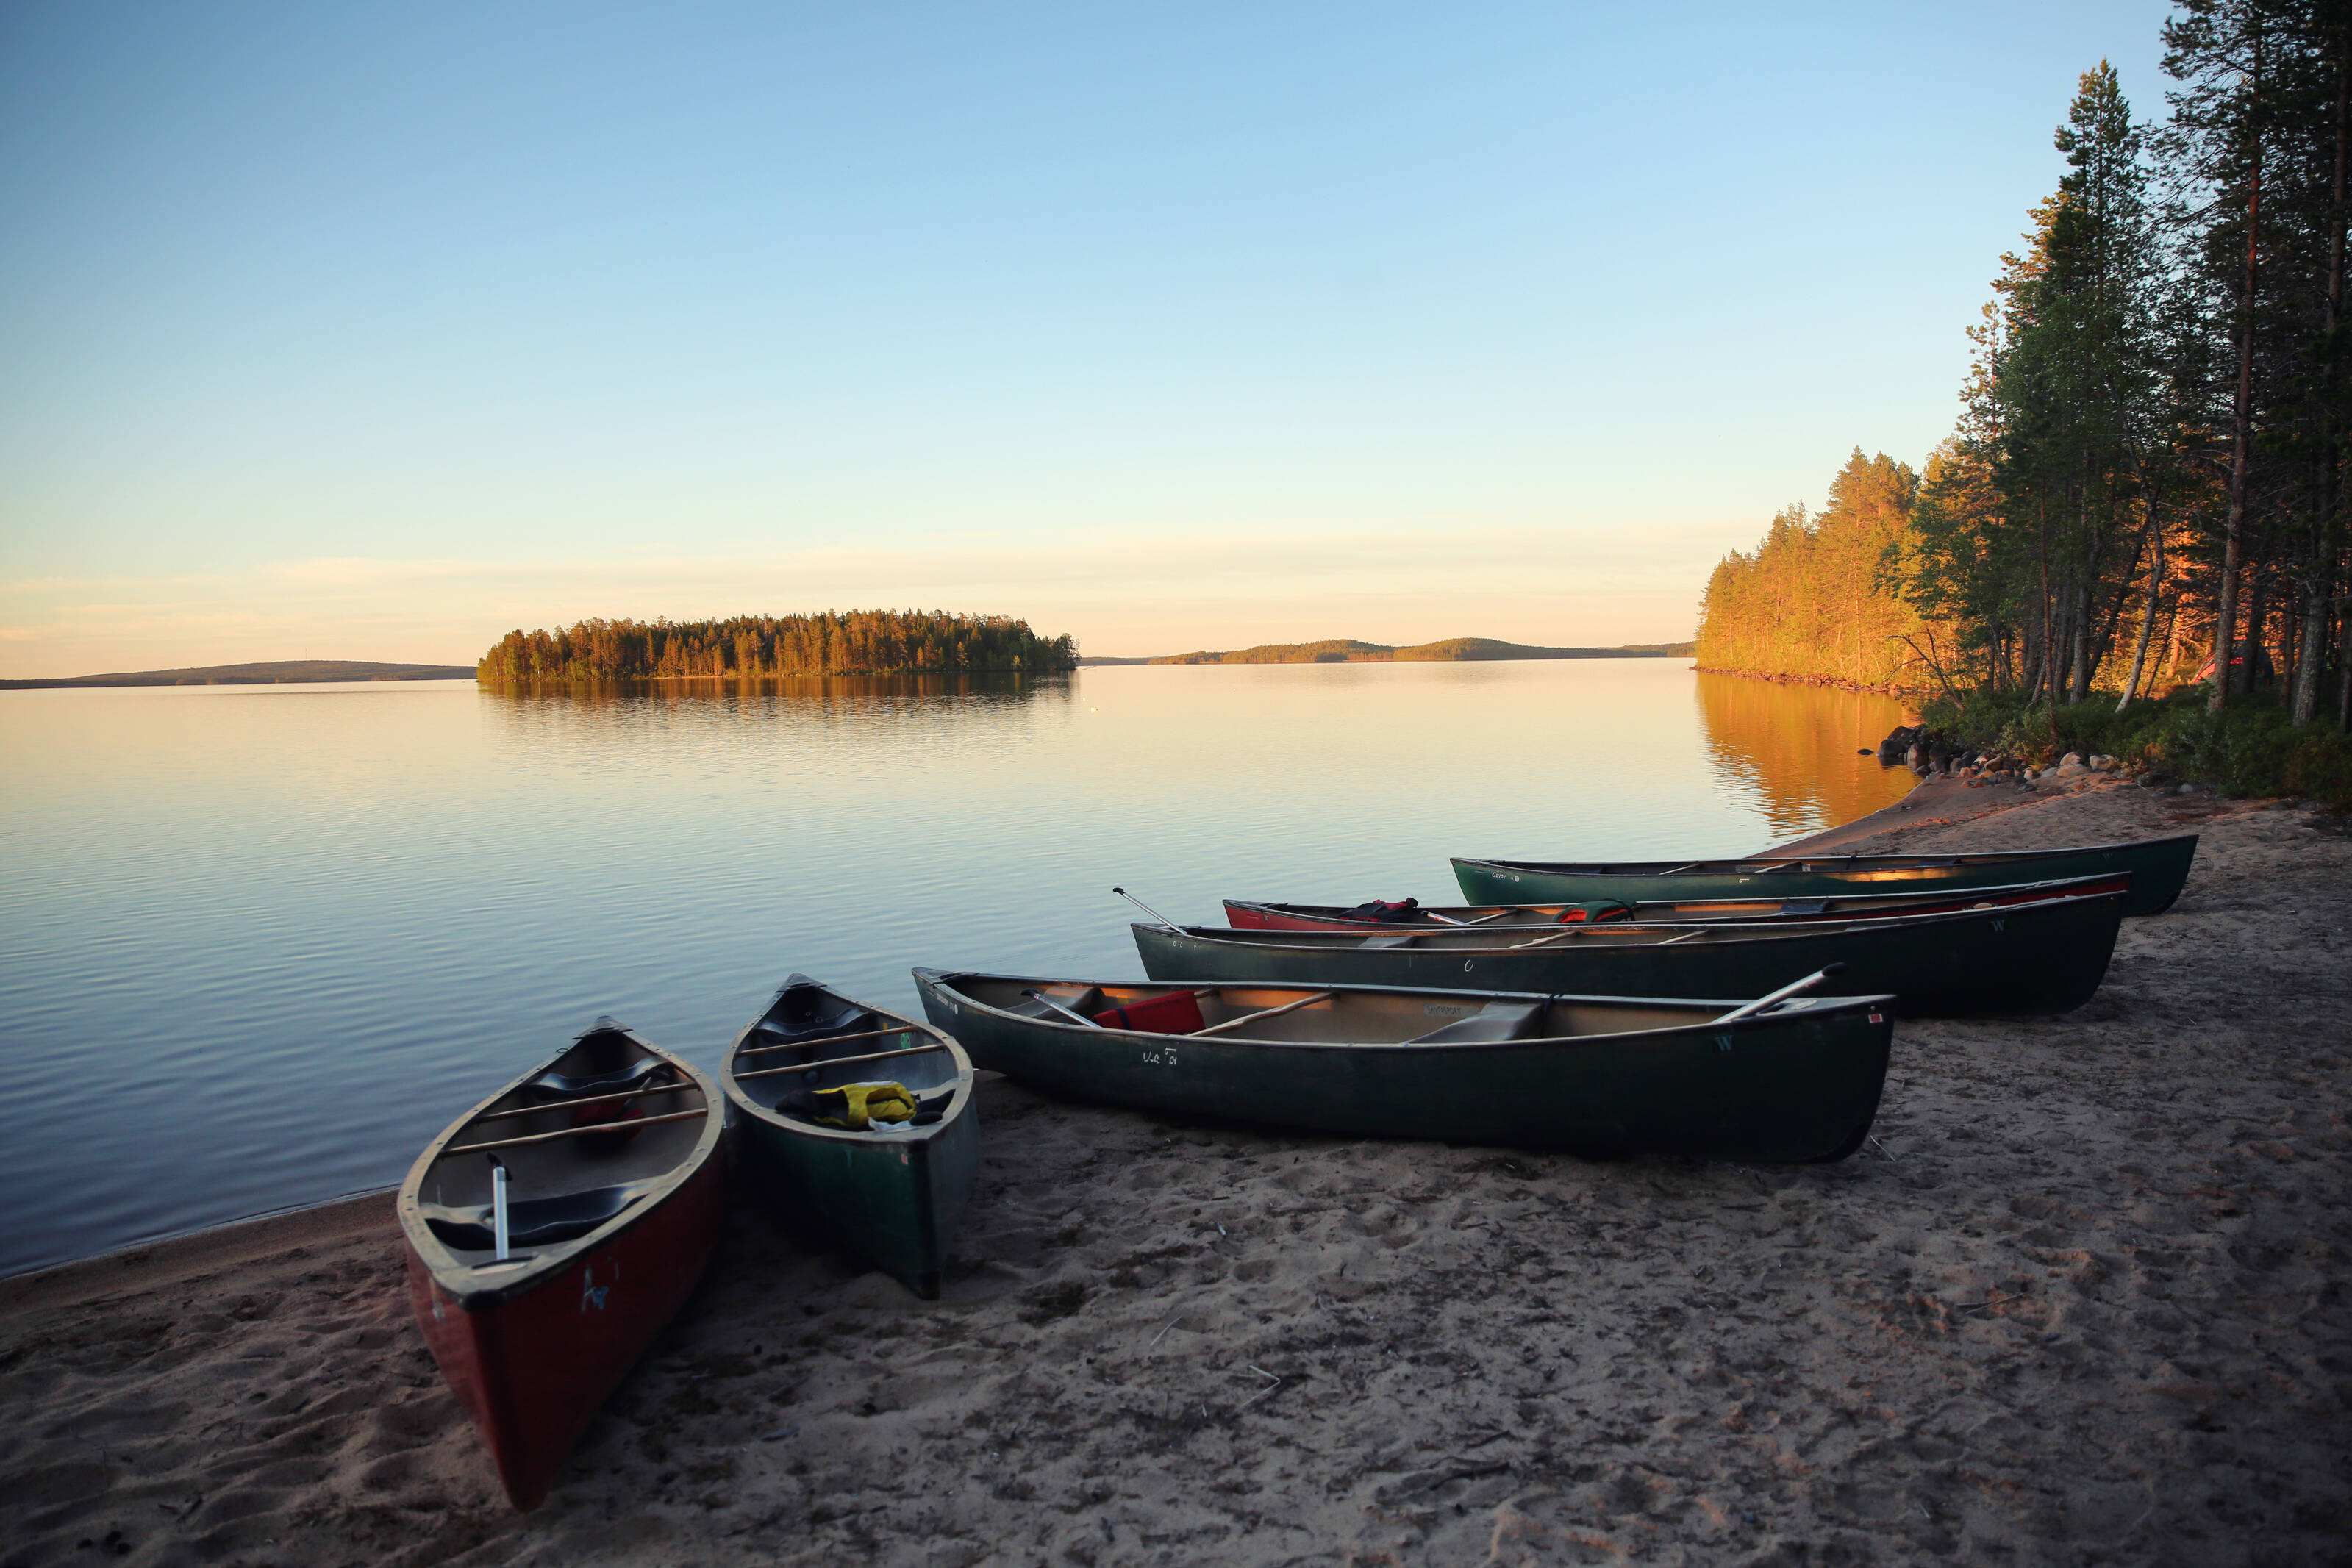 rowing boats lined up on a beach in the Finnish Lapland